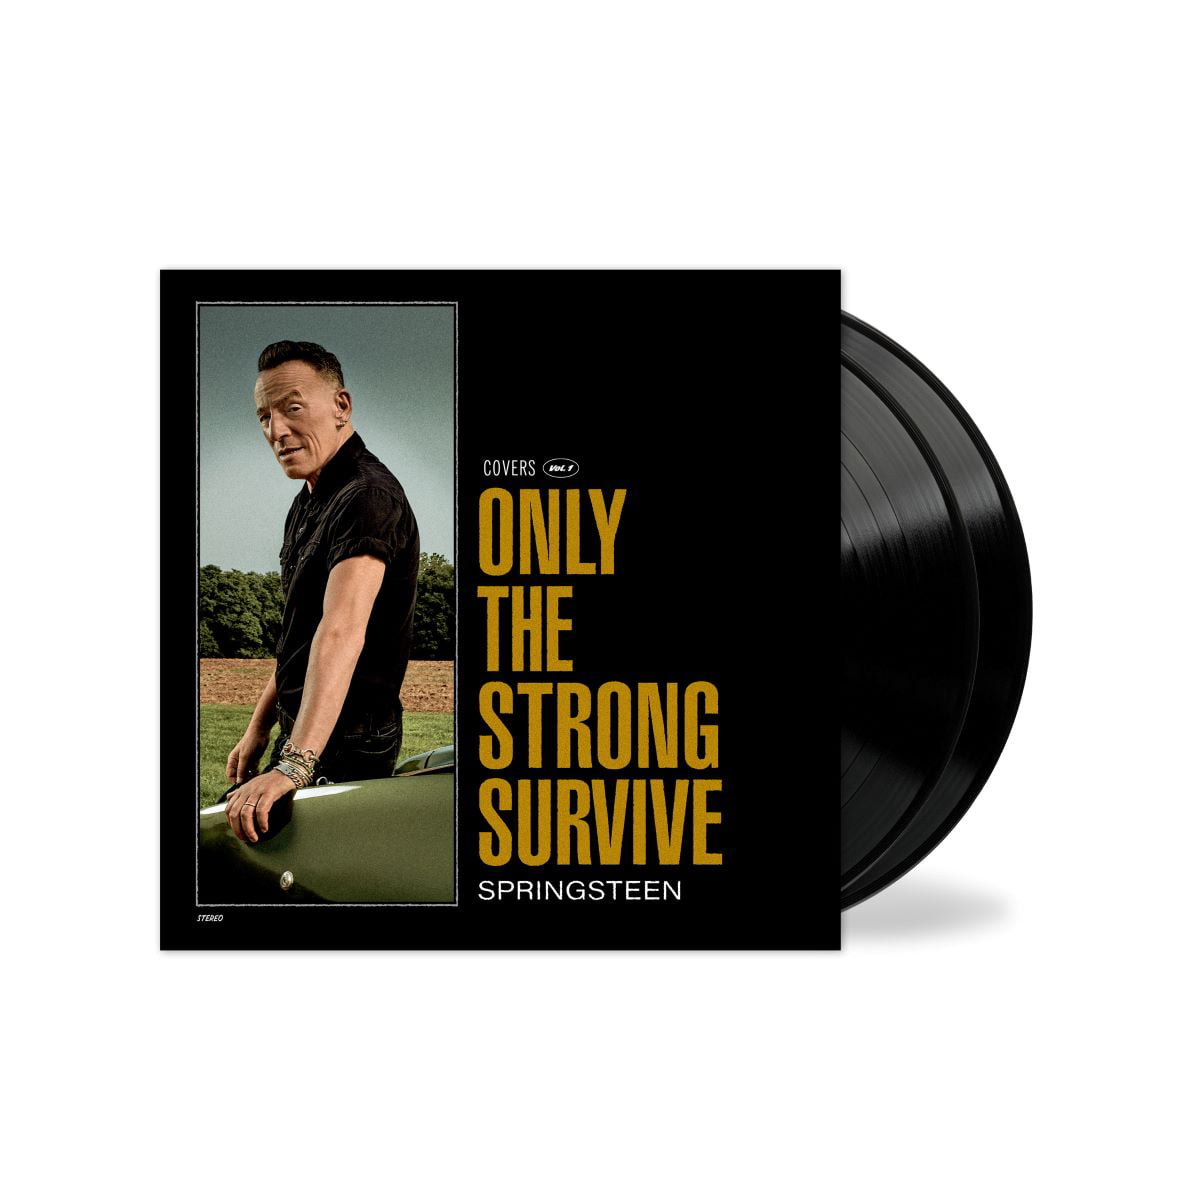 Bruce Springsteen - Only The Strong Survive - Vinyl $17.21